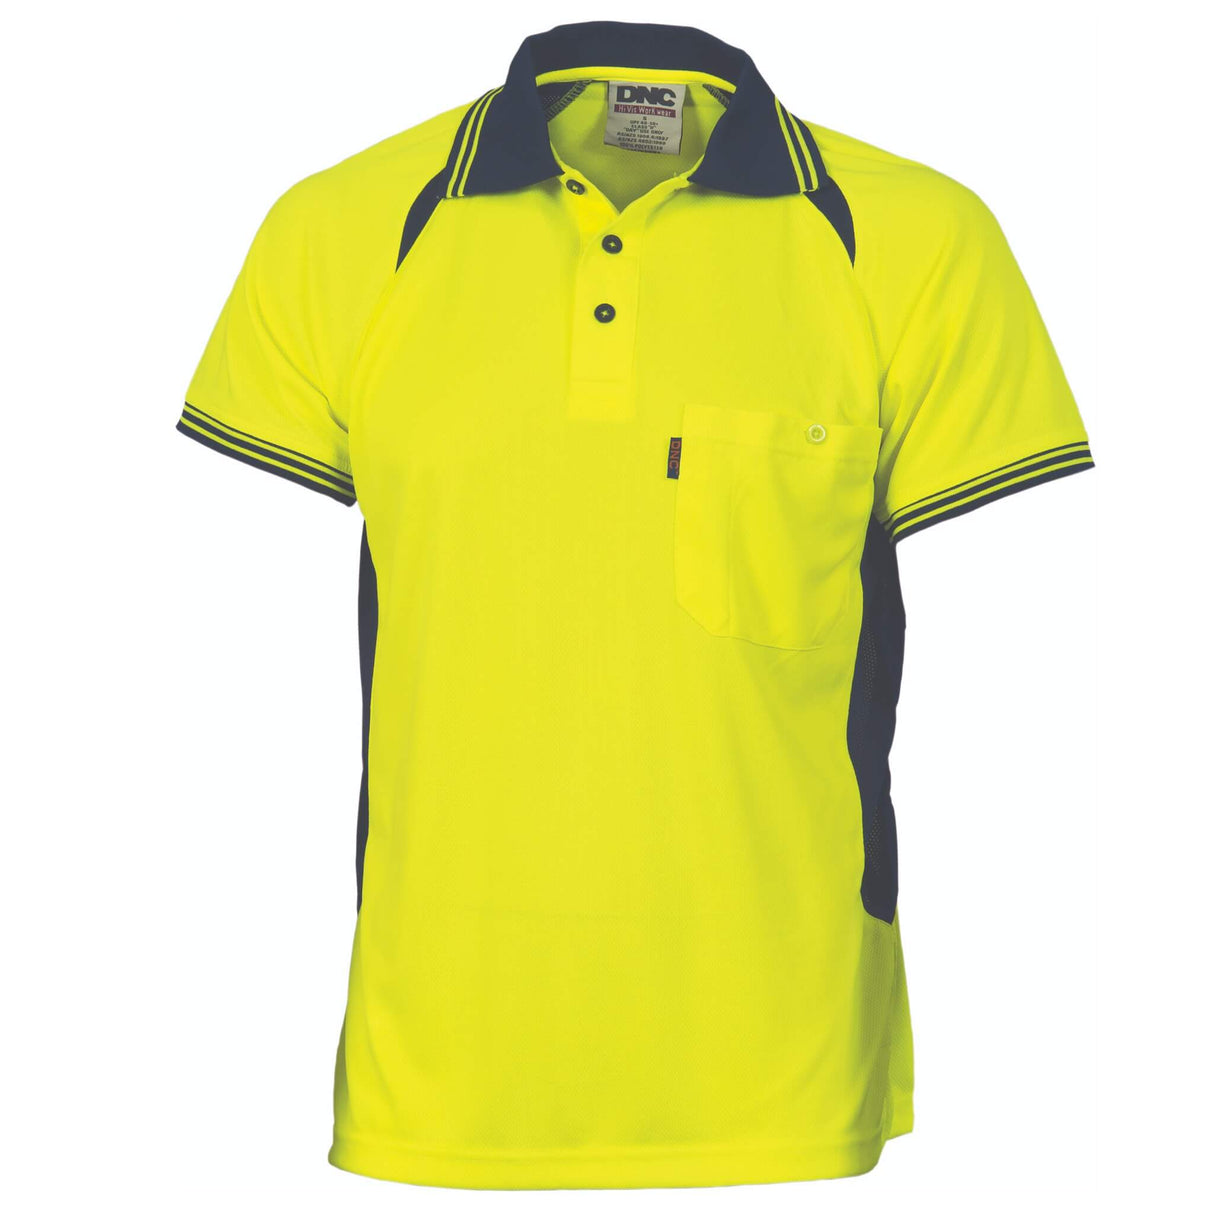 3901 Cool-Breeze Contrast Mesh Polo